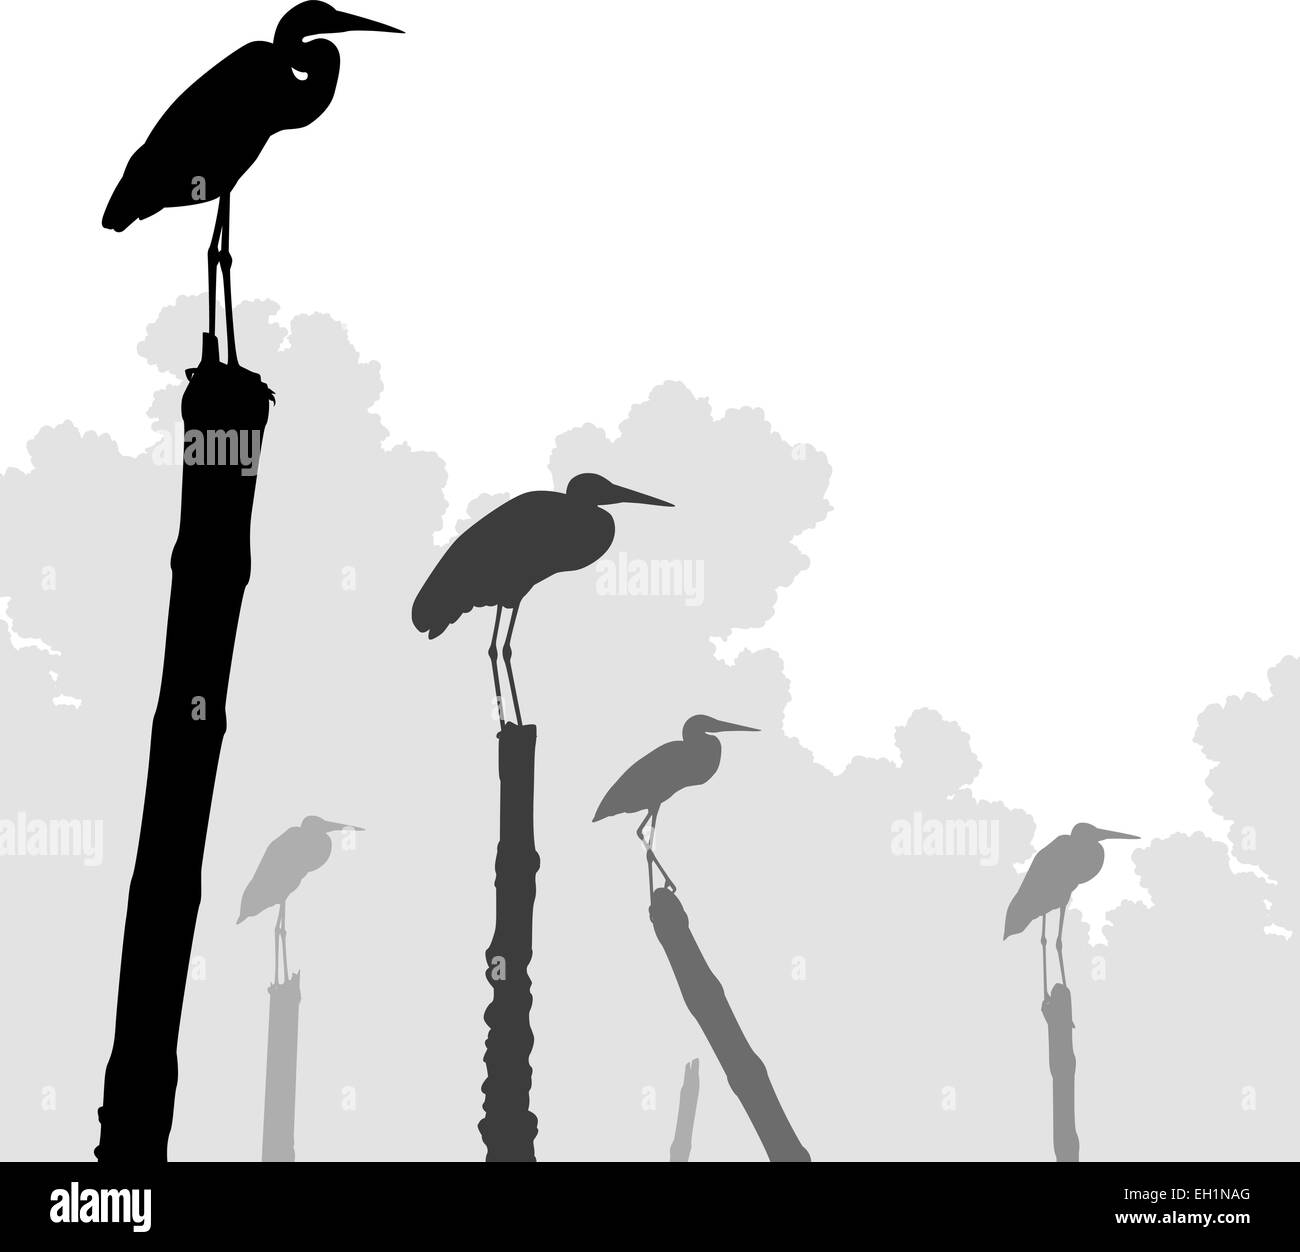 Editable vector illustration of egret silhouettes perched on poles with birds as separate objects Stock Vector